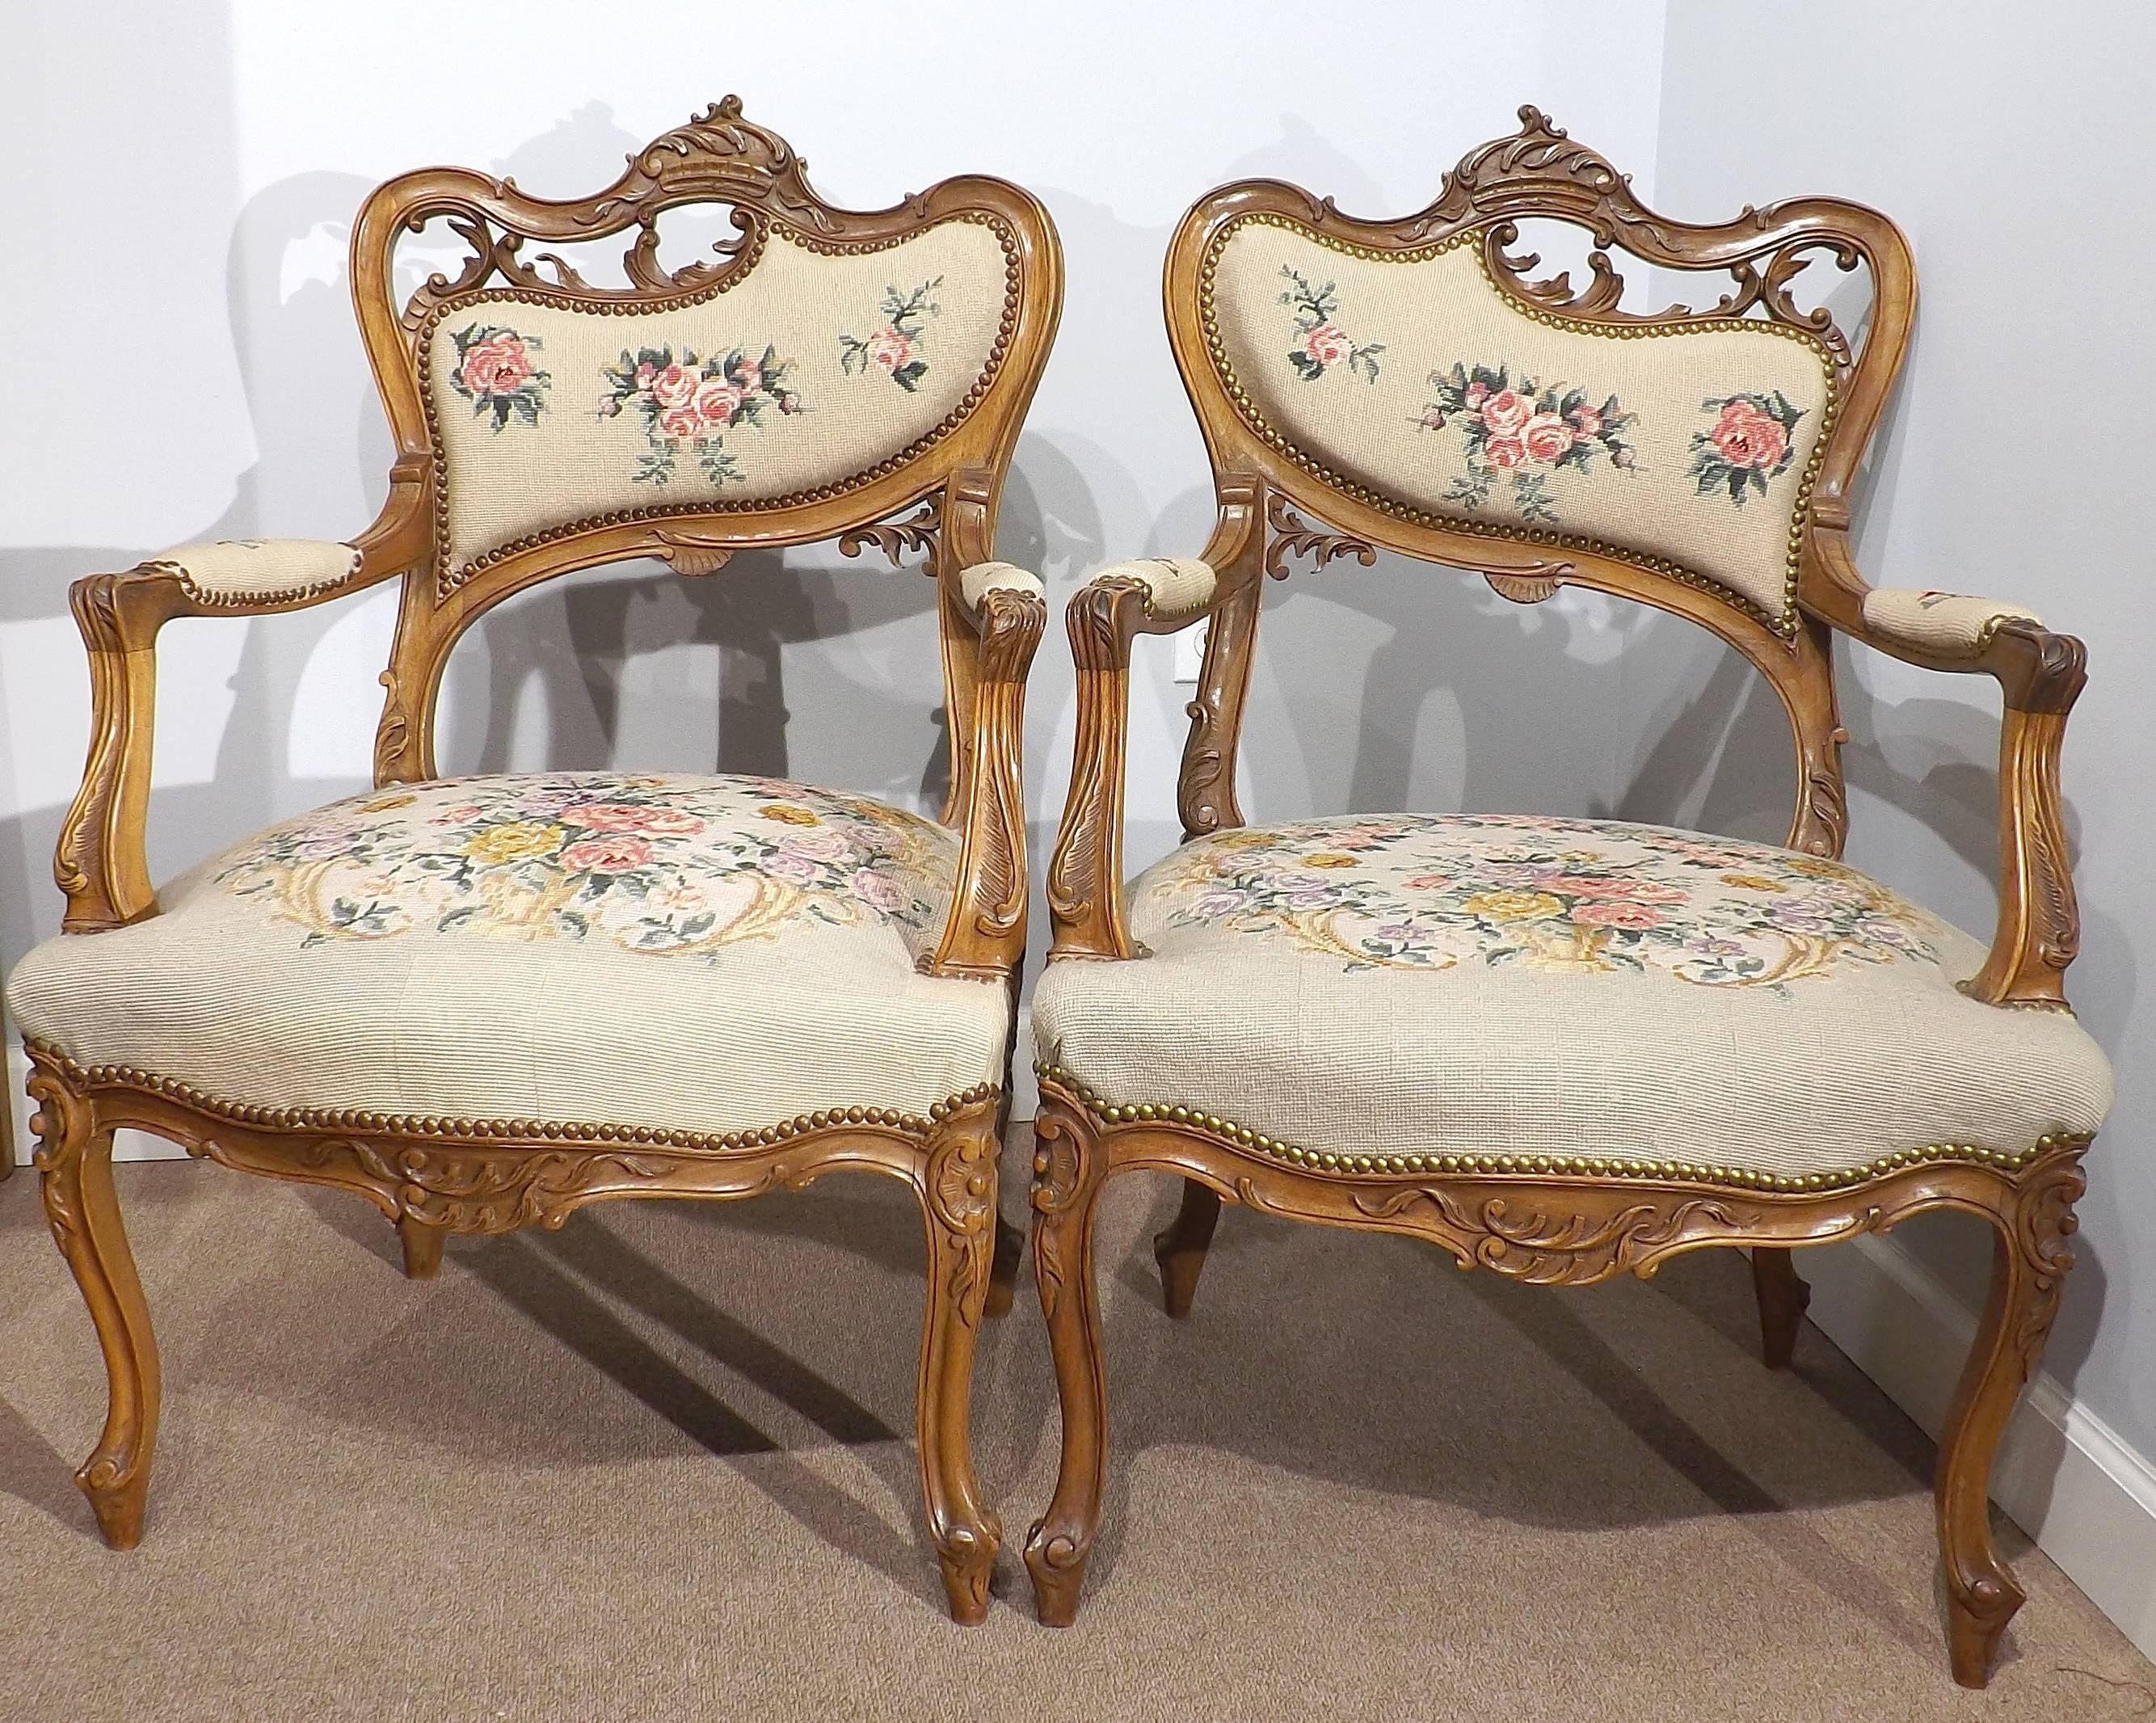 Hand-carved walnut fauteuils in Louis XV style with Art Nouveau subtleties consistent with their time manufacture. Covered with a floral needlepoint tapestry. 

Early professional restoration of tapestry on one of the seats, see pictures.